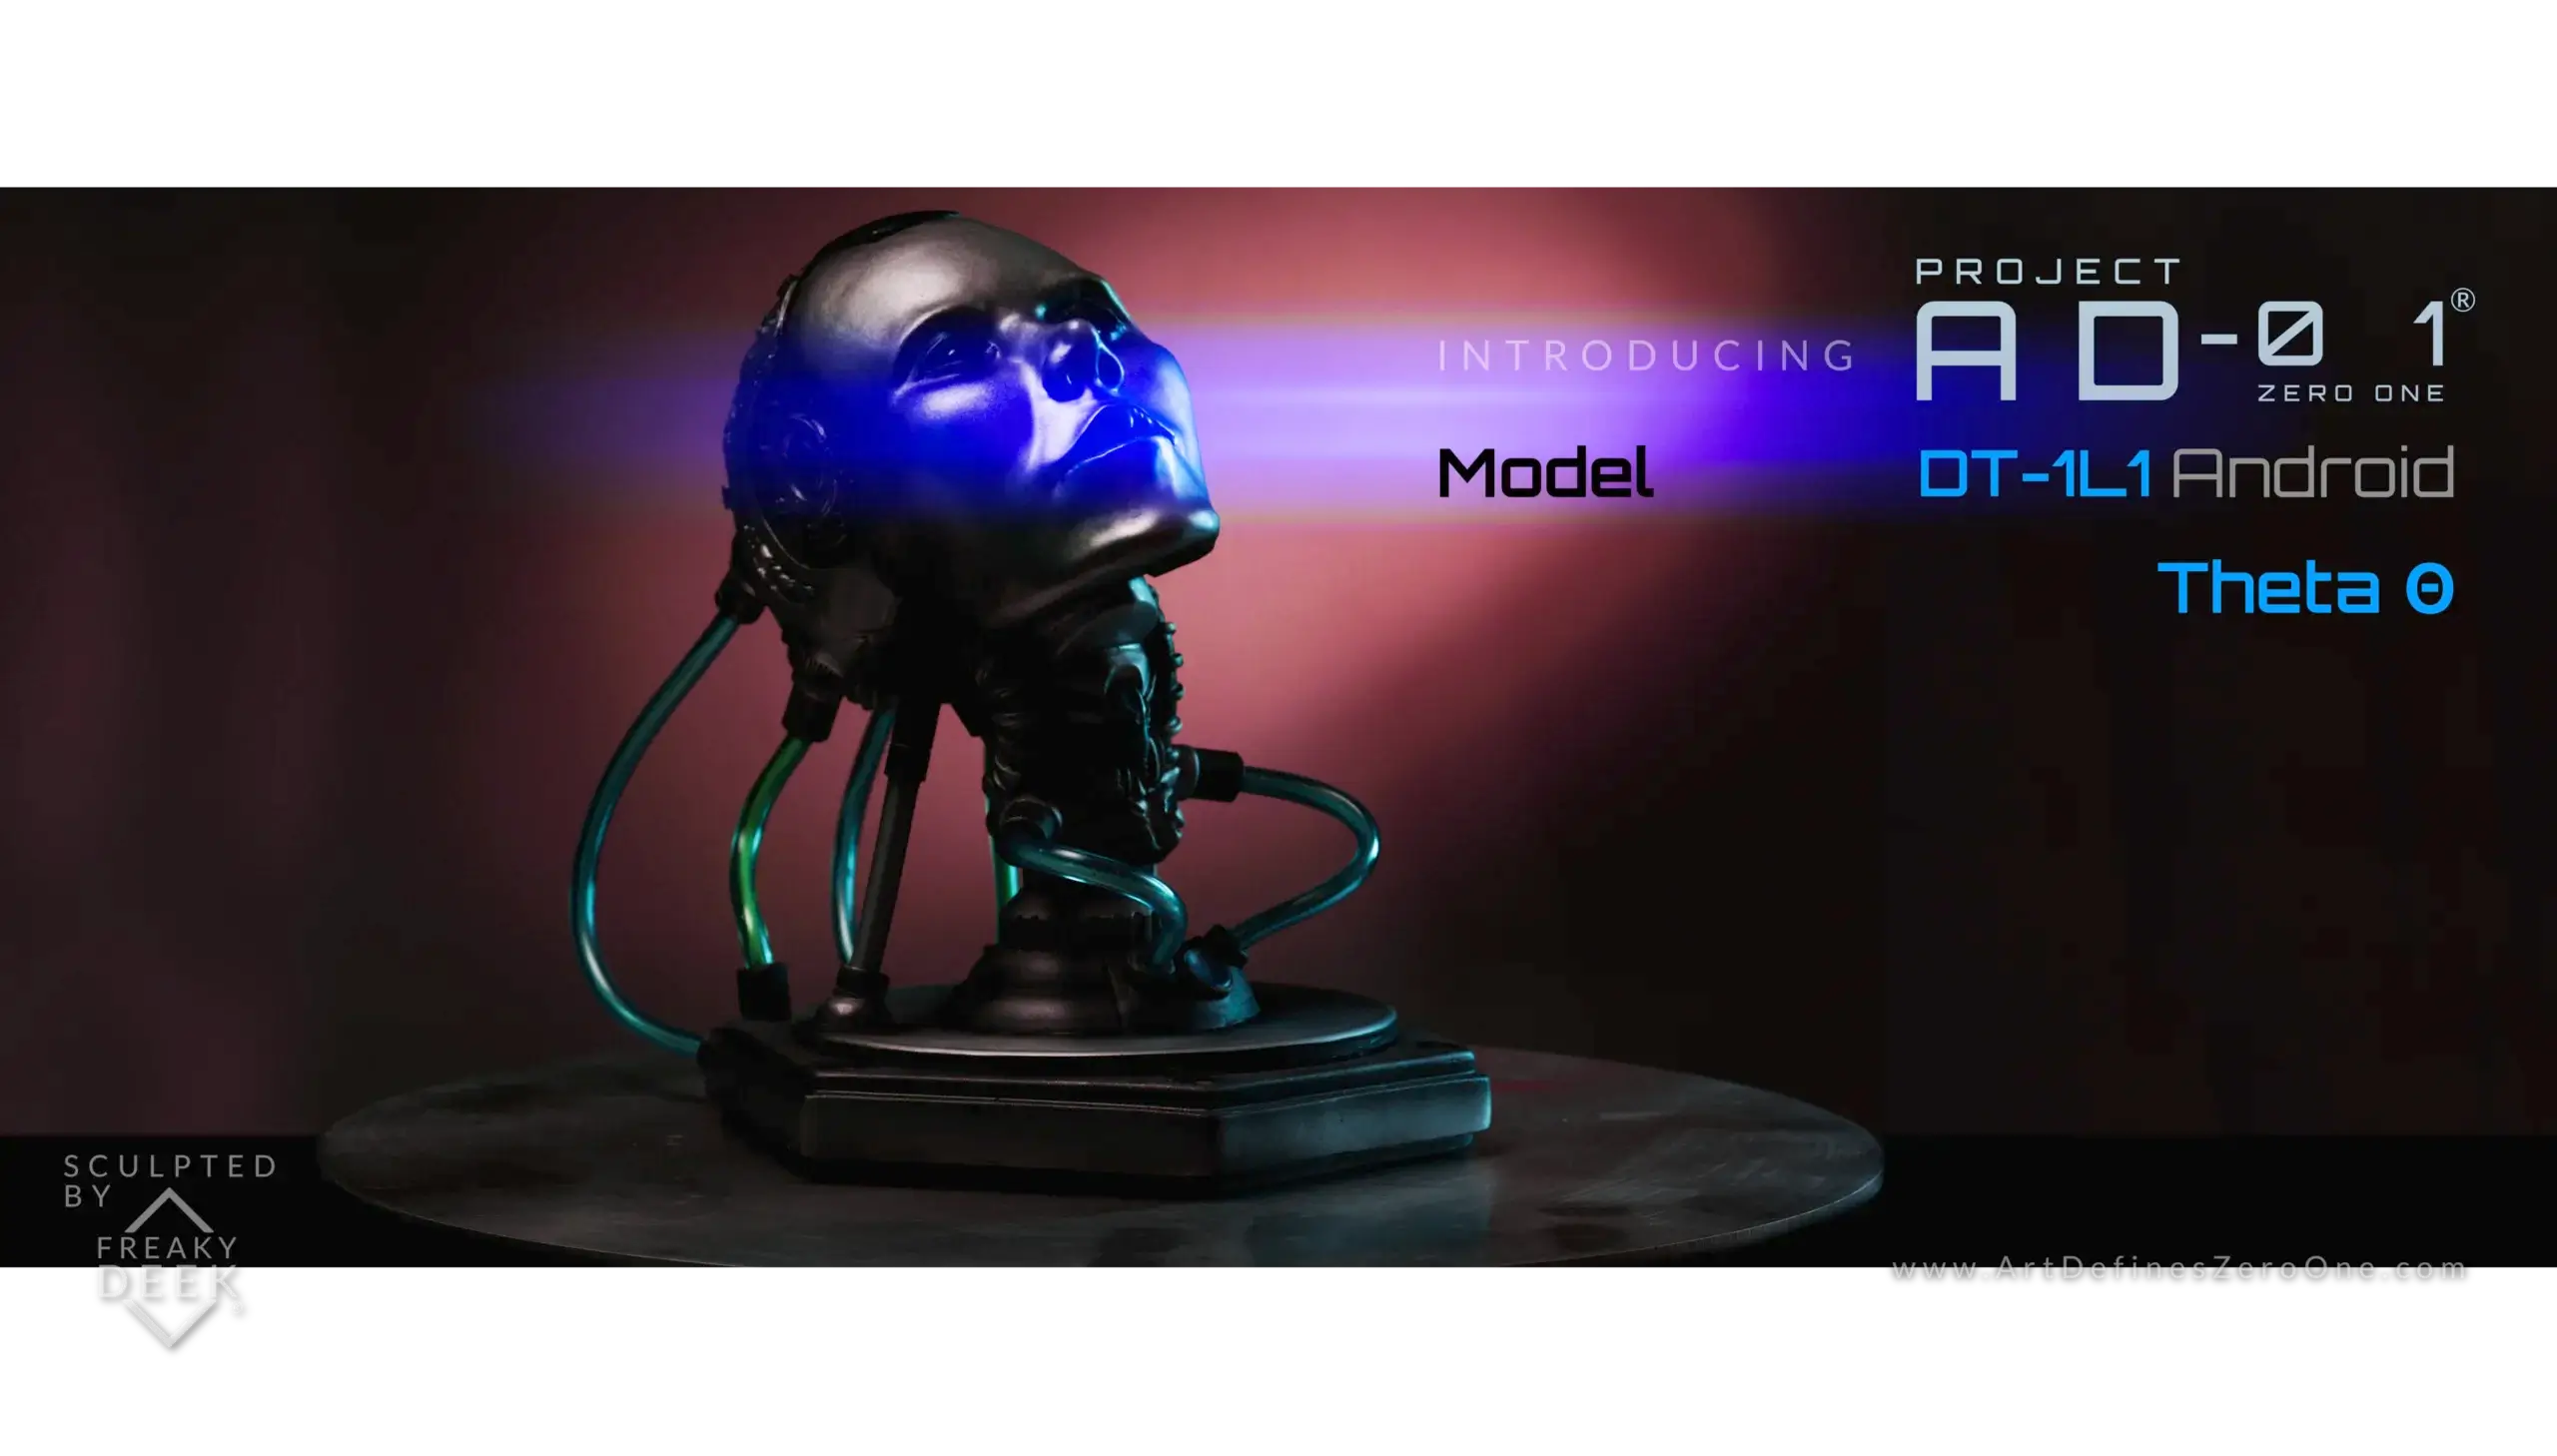 Project AD-01 handmade android blue sculpture Theta front view